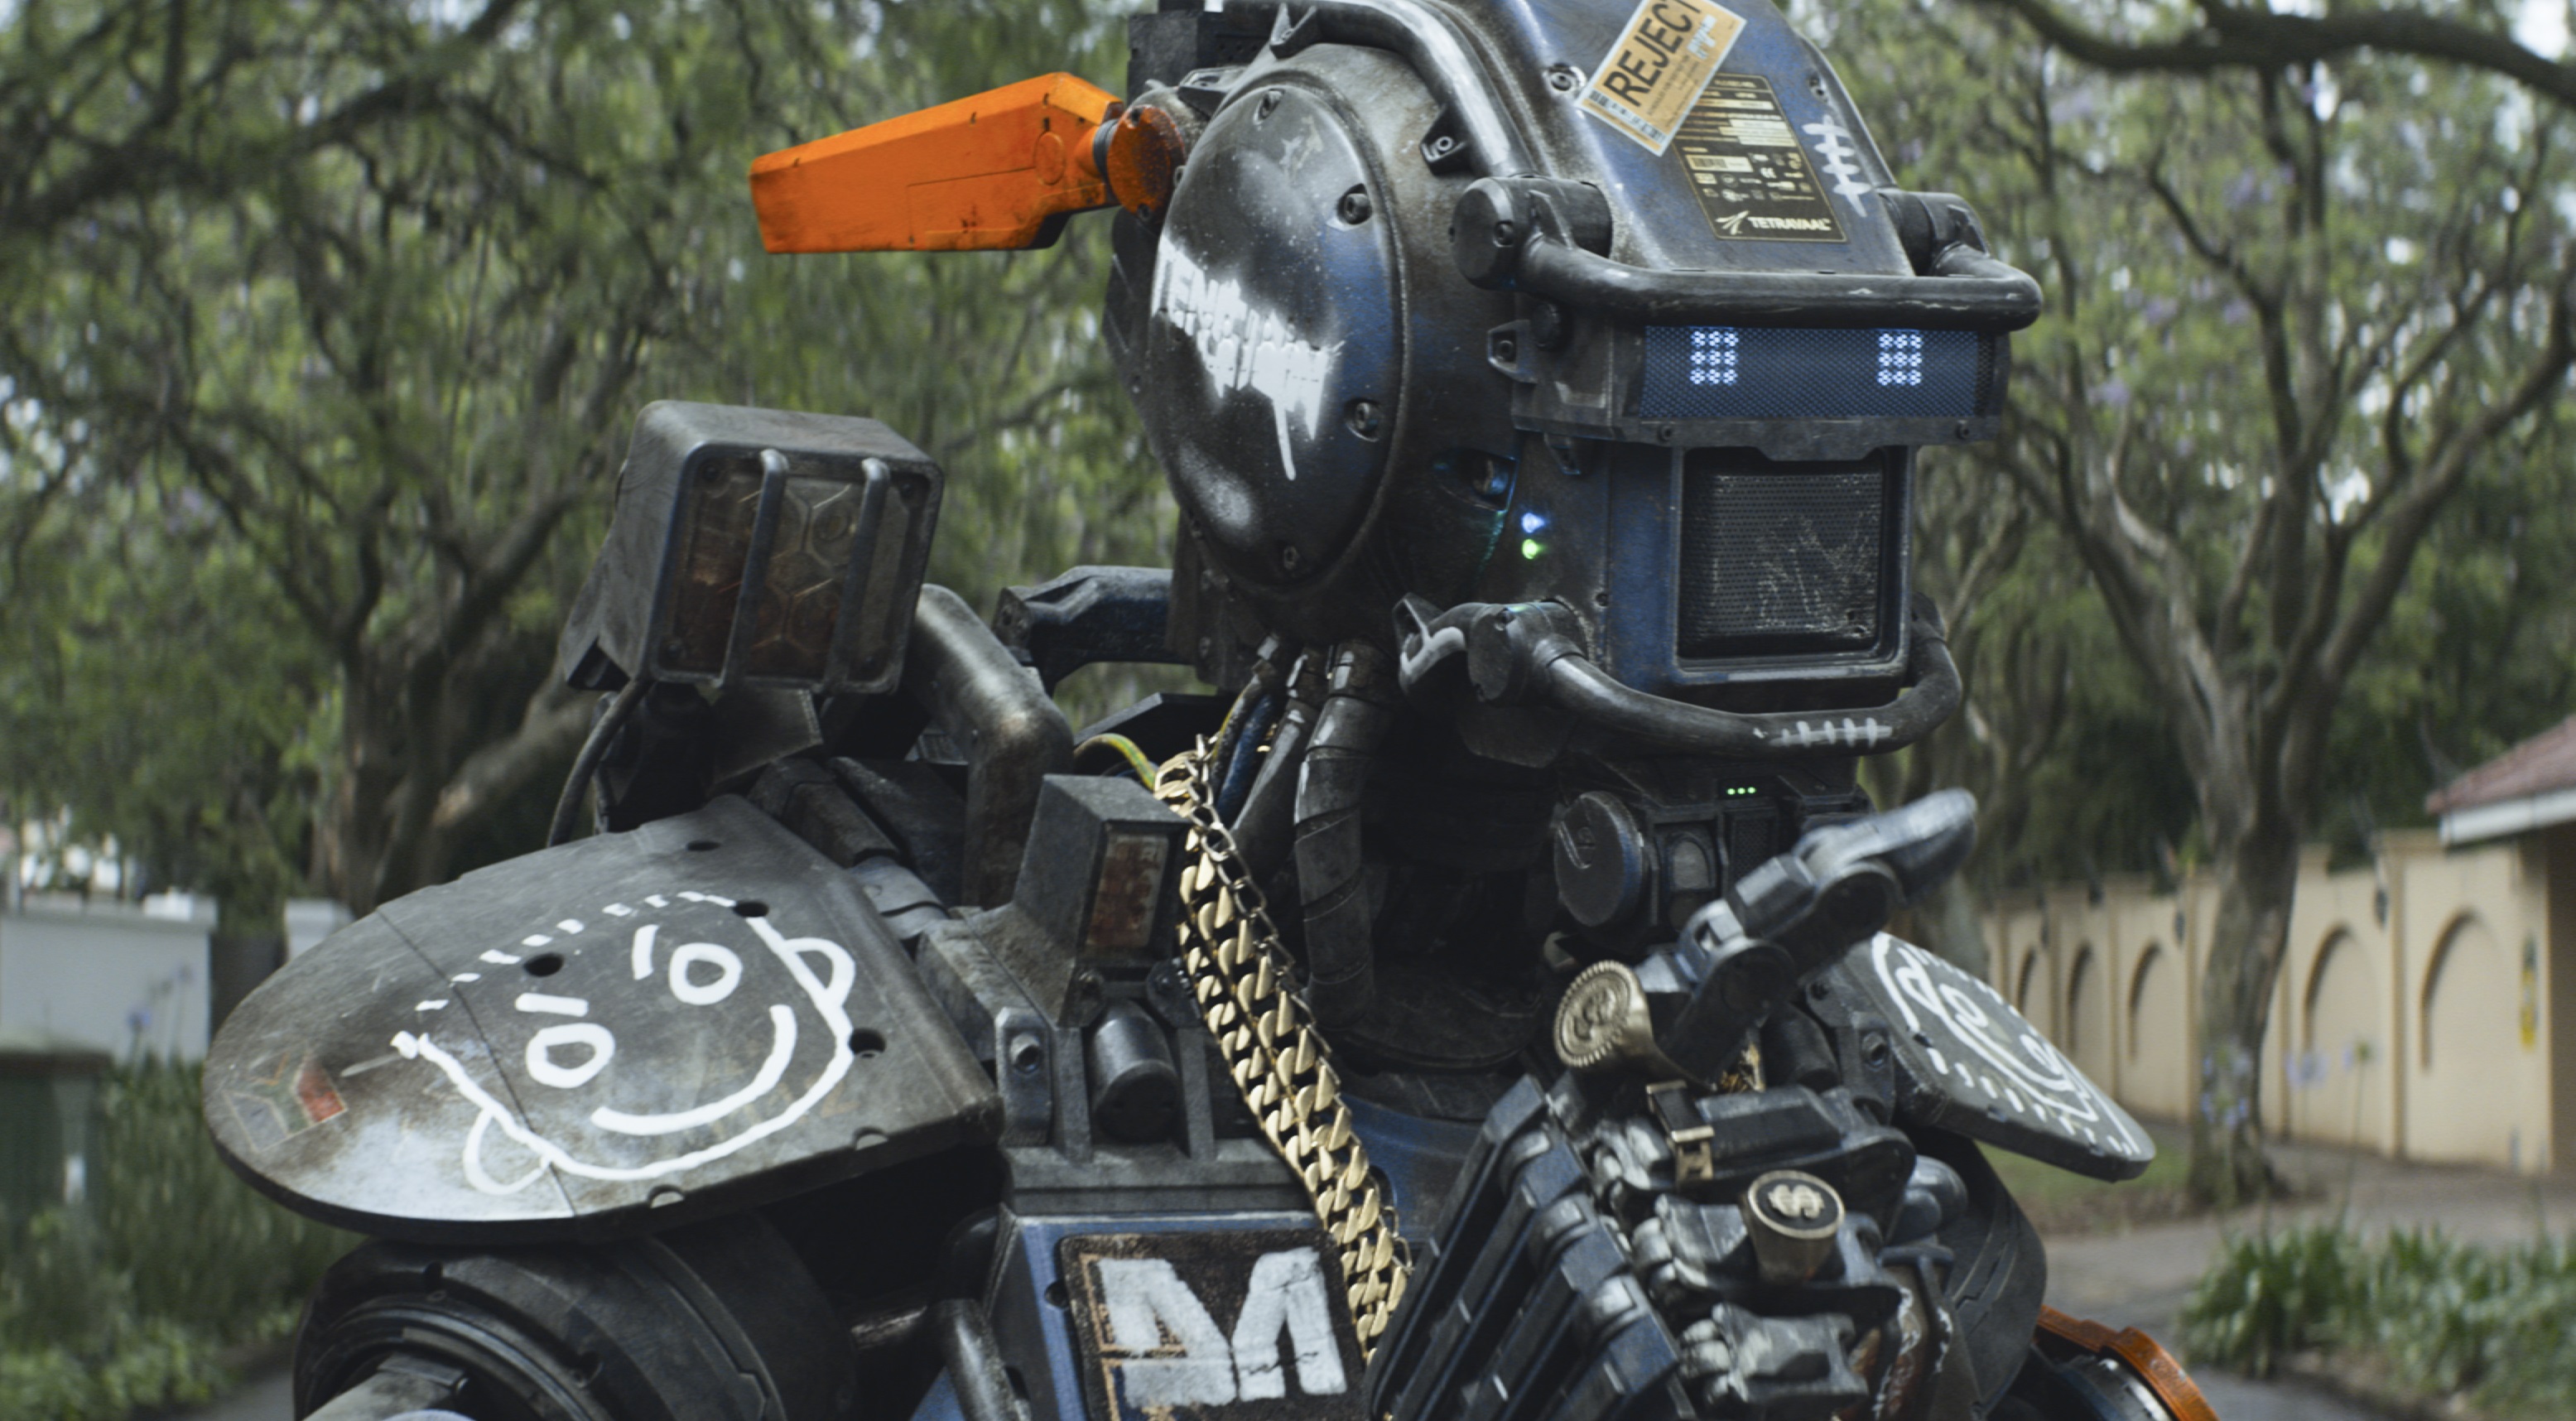 Sony Pictures: Sharlto Copley stars in "Chappie"